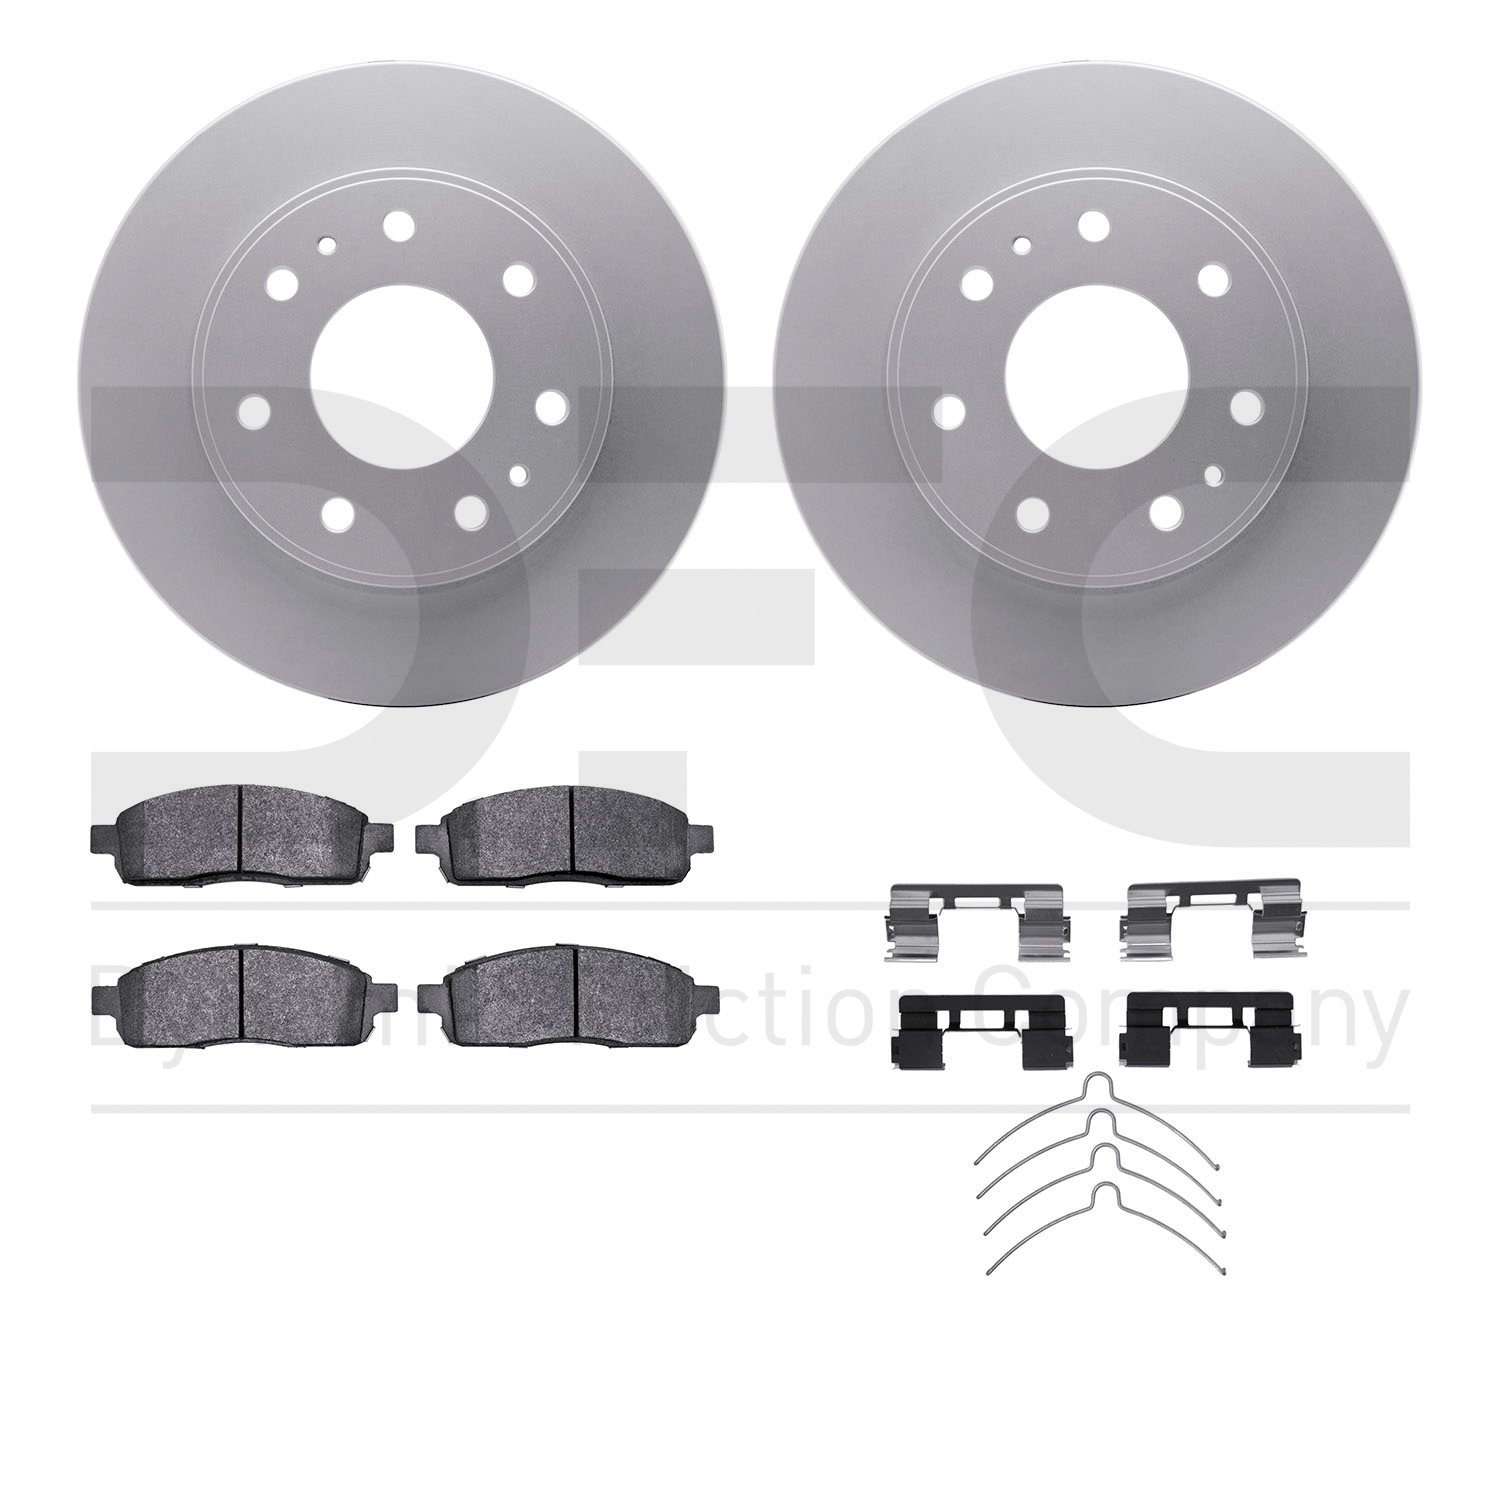 4412-54068 Geospec Brake Rotors with Ultimate-Duty Brake Pads & Hardware, 2009-2009 Ford/Lincoln/Mercury/Mazda, Position: Front